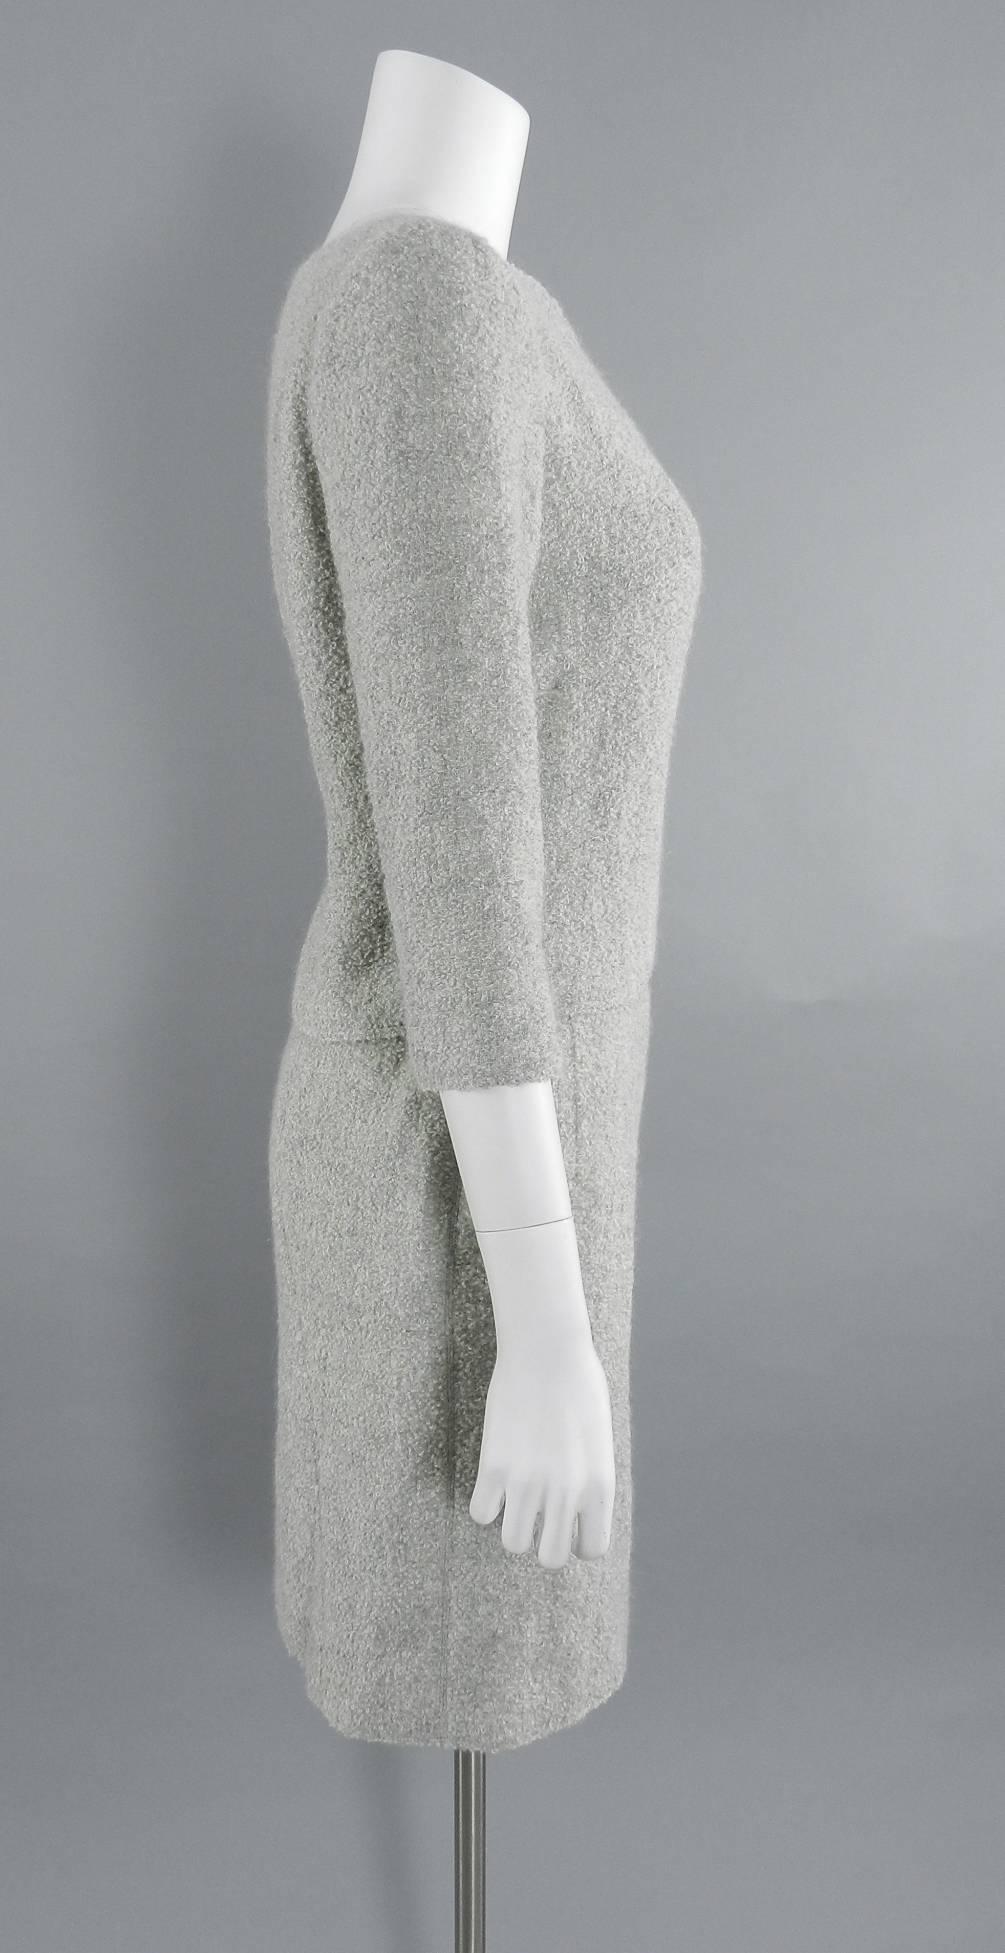 Pierre Balmain Numbered haute couture skirt suit from winter 2000 collection designed by Oscar de la Renta. 1960's inspired design with slim pencil skirt and sheath top. Light dove grey boucle wool. Skirt has two side hip pockets, top has 3/4 length